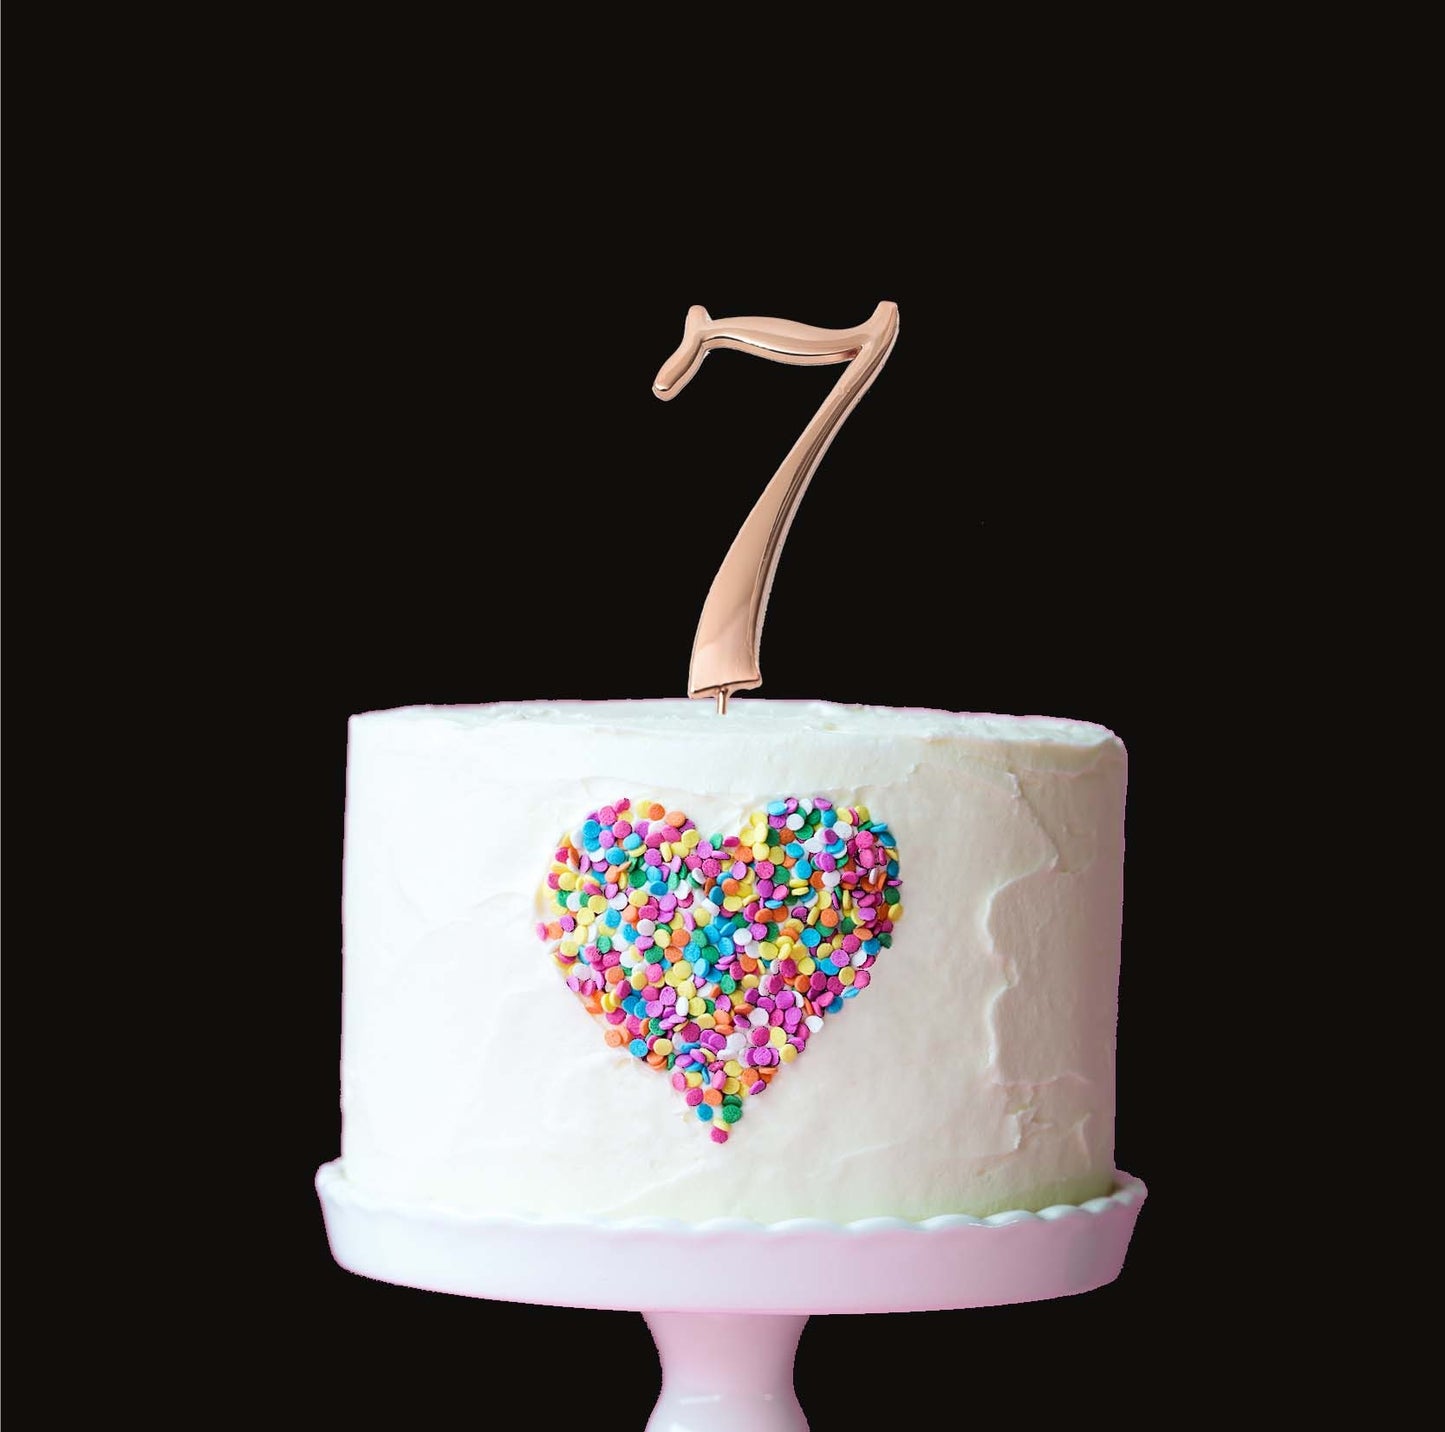 Rose Gold metal numeral 7 cake topper pick